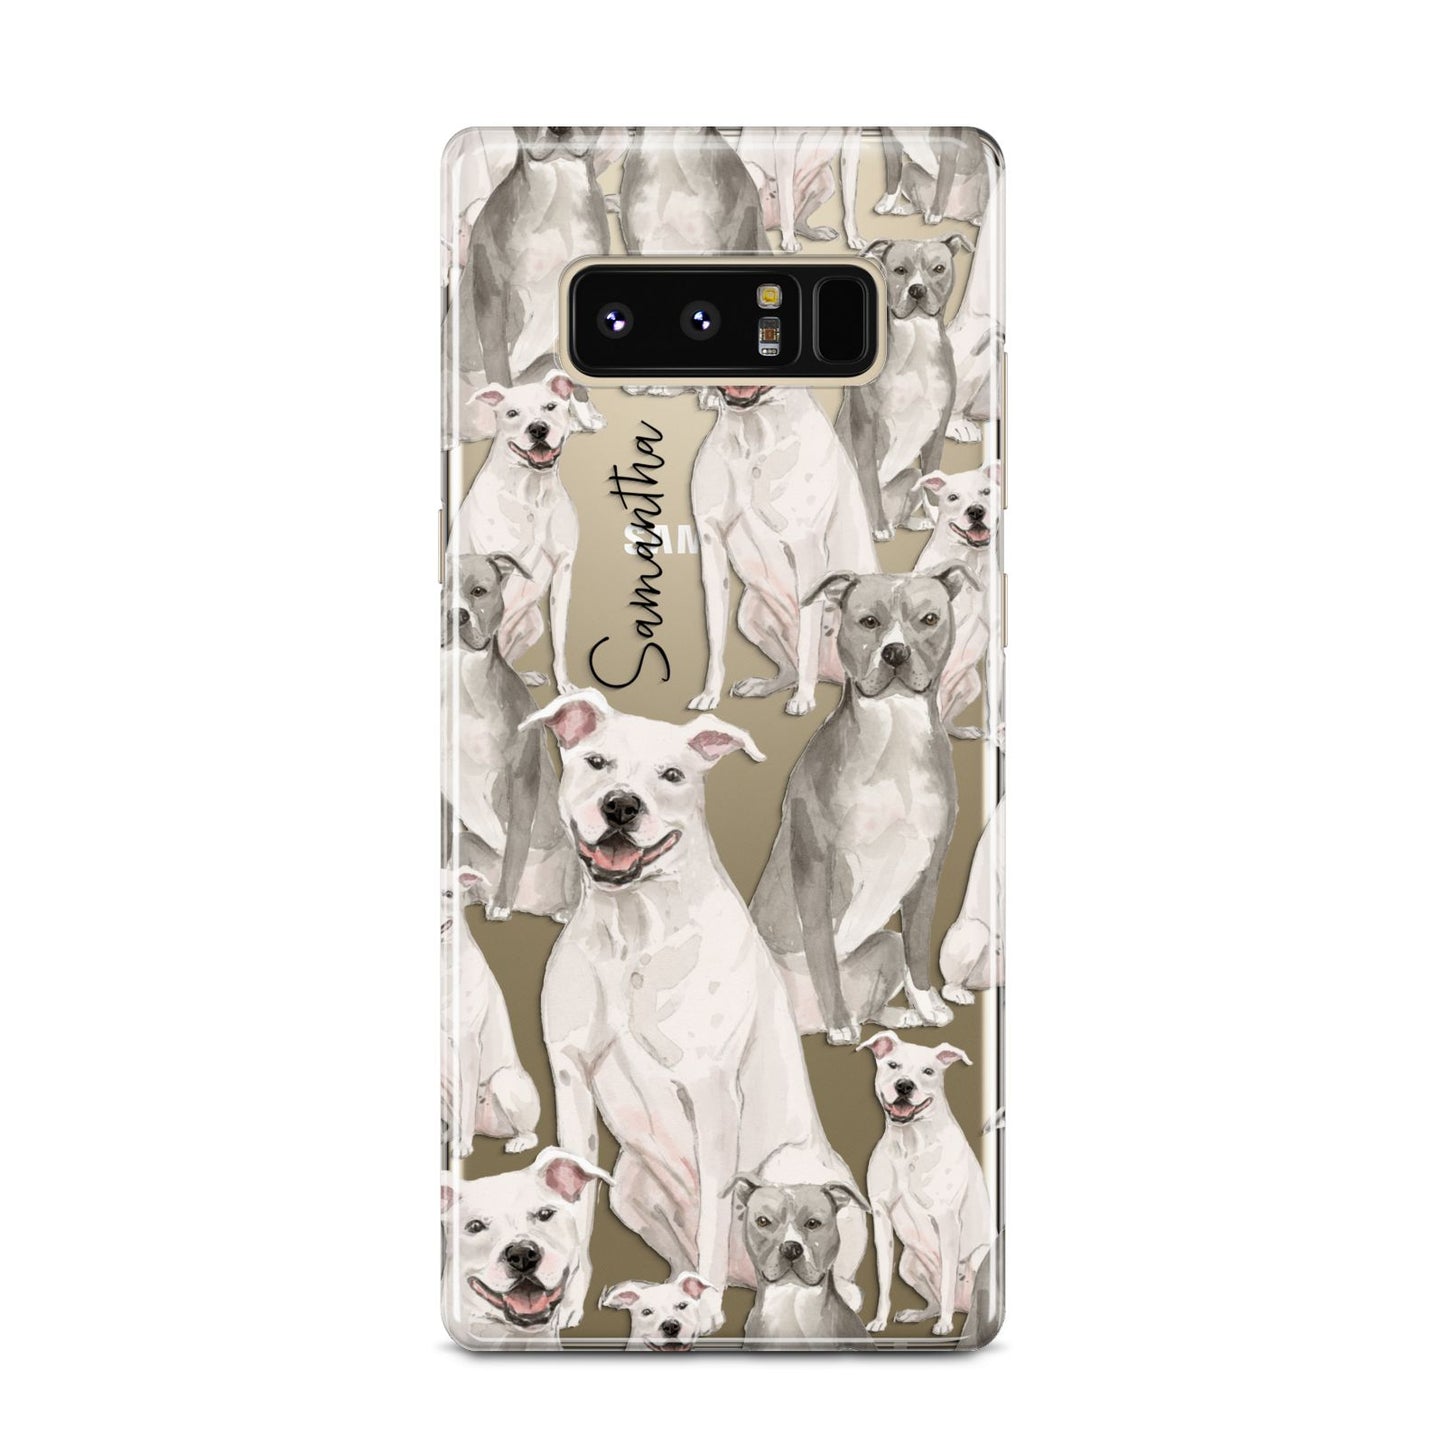 Personalised Staffordshire Dog Samsung Galaxy Note 8 Case